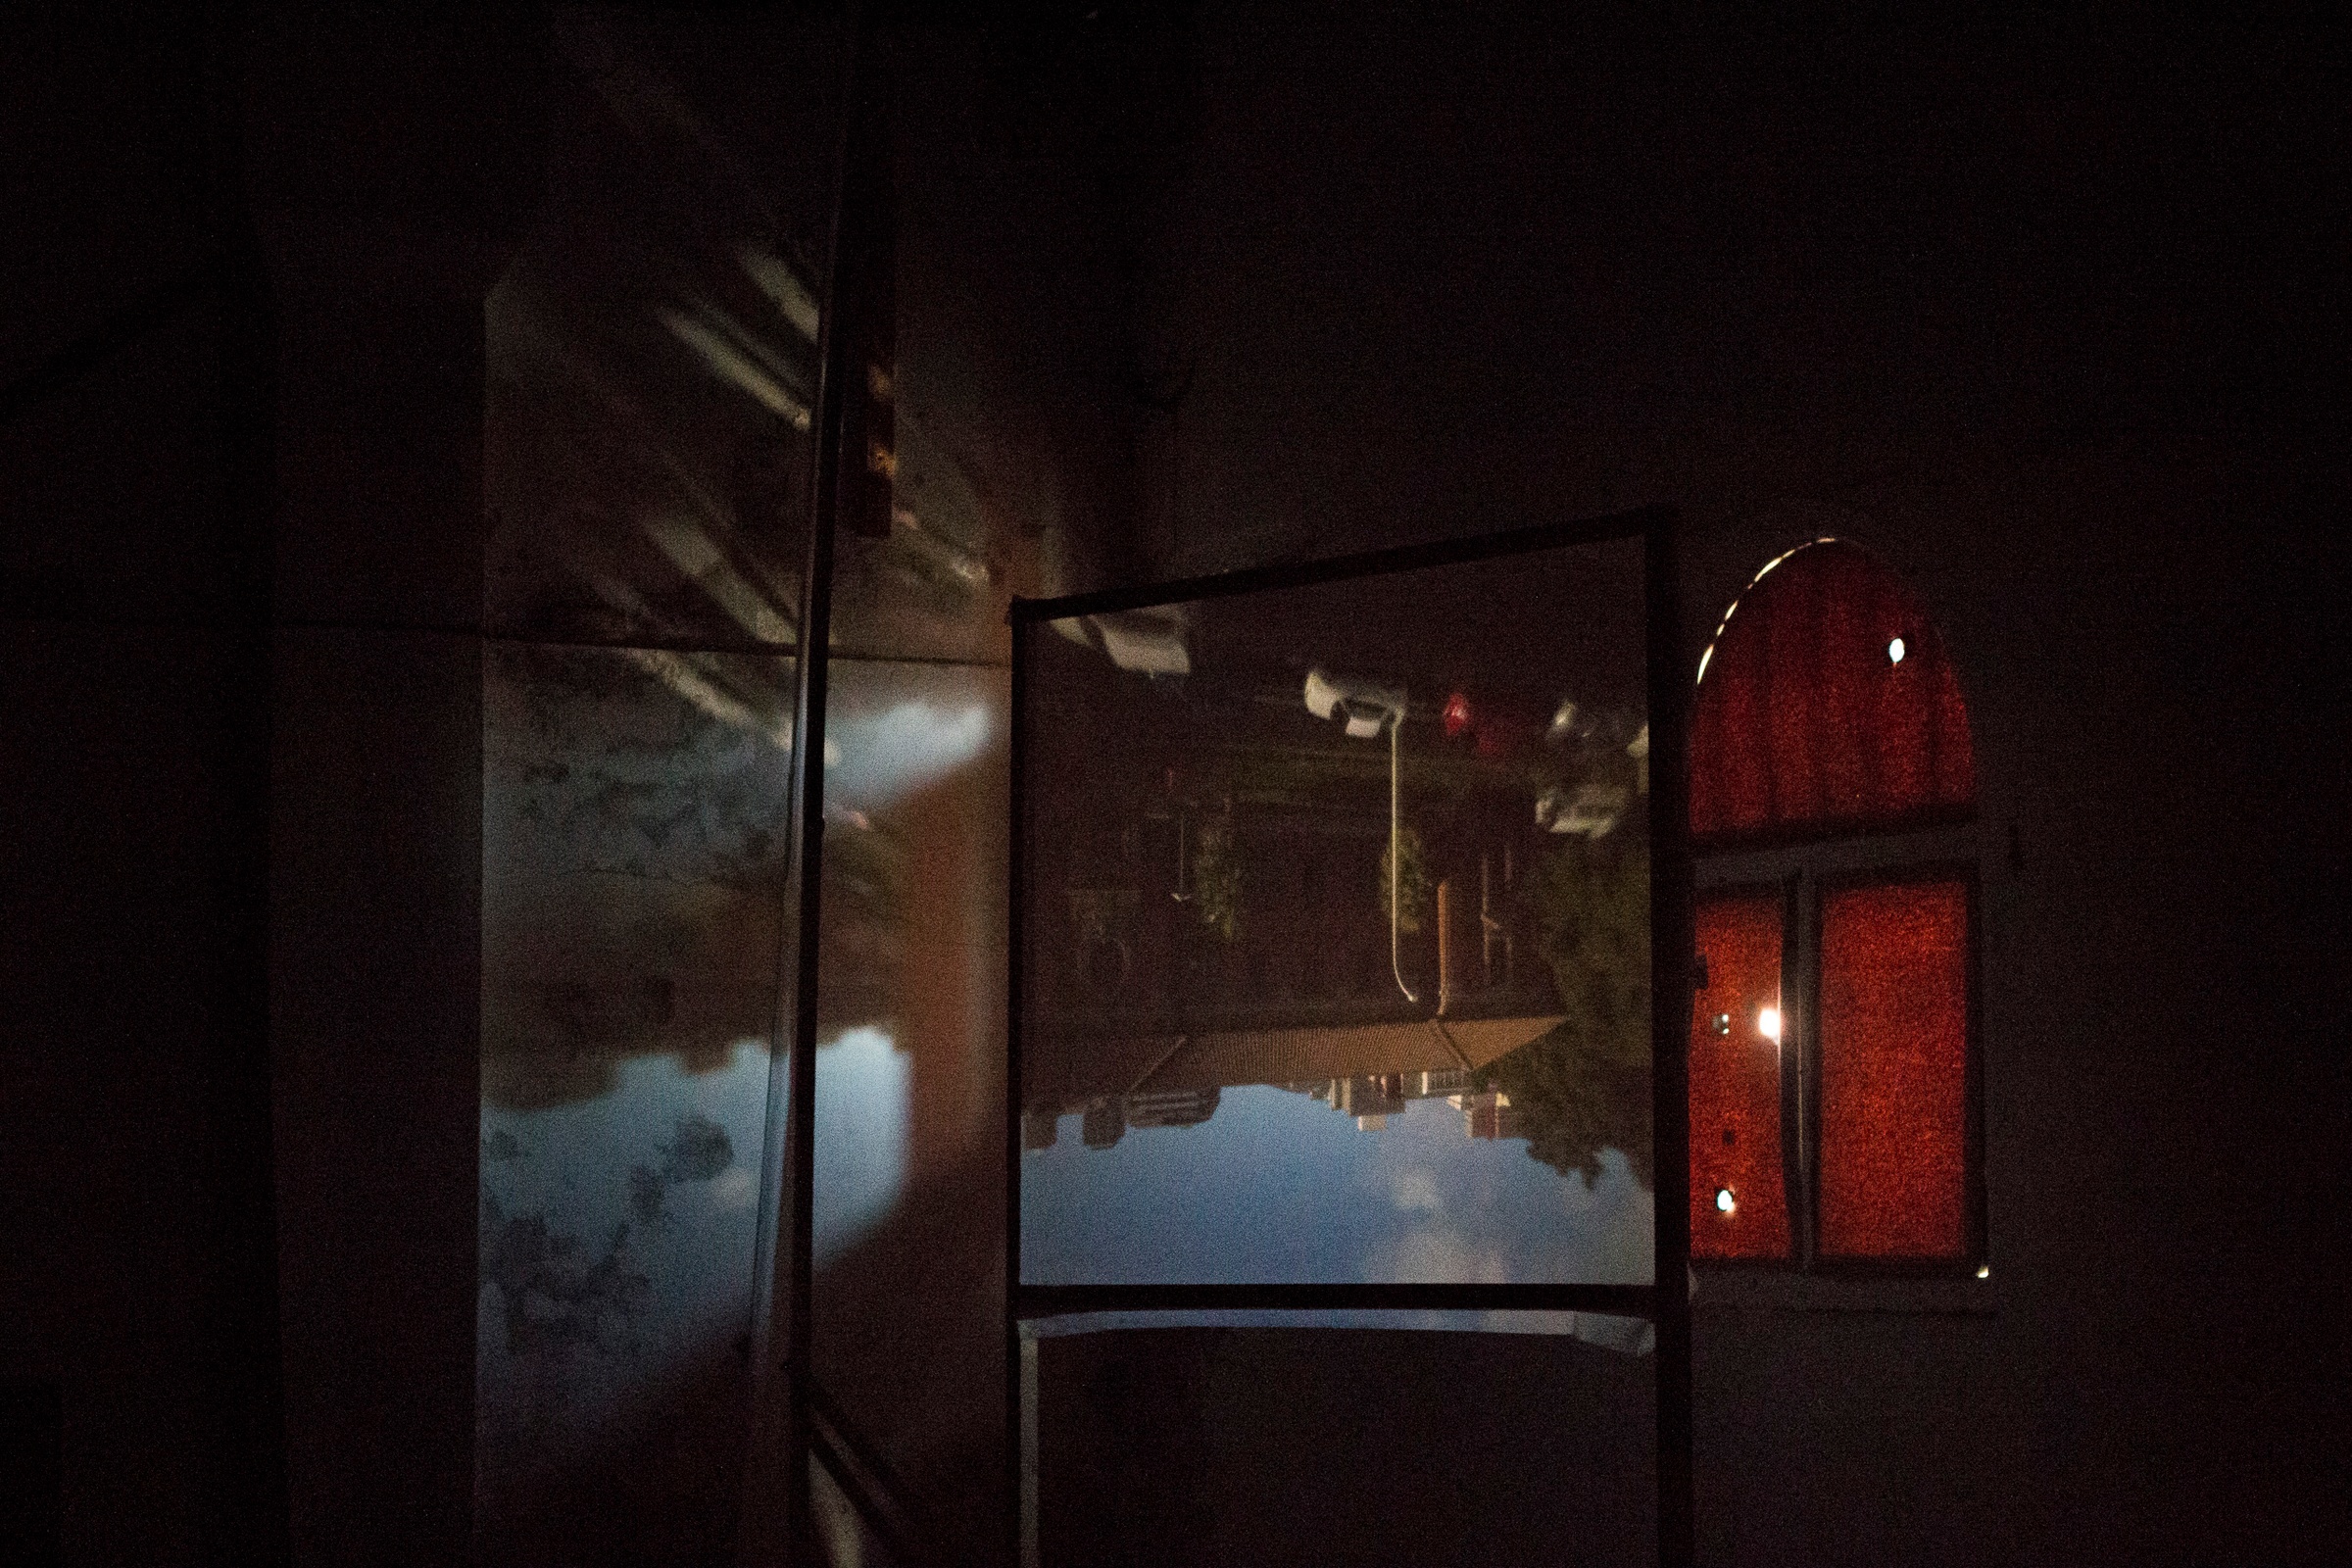 Installation photograph from George Mahashe’s ‘Camera Obscura #3’ exhibition on A4’s top floor. The darkened space features a freestanding surface with a projected image from A4’s exterior facilitated by Mahashe’s pinhole camera.
